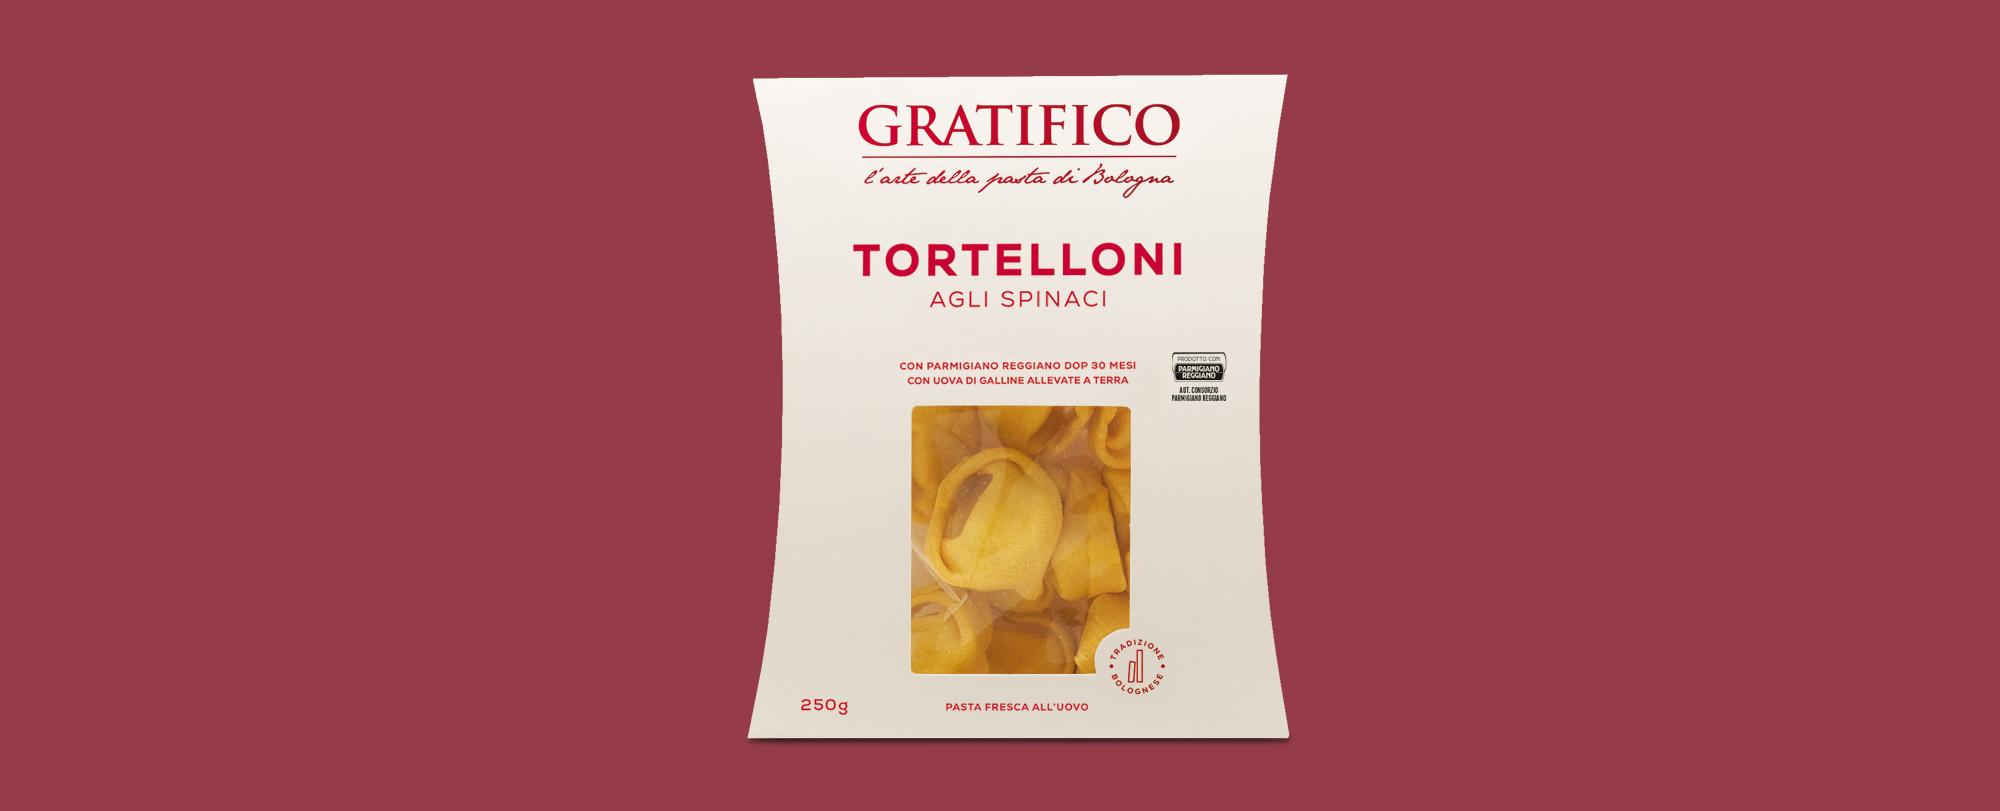 Tortelloni_spinach-pack-mockup